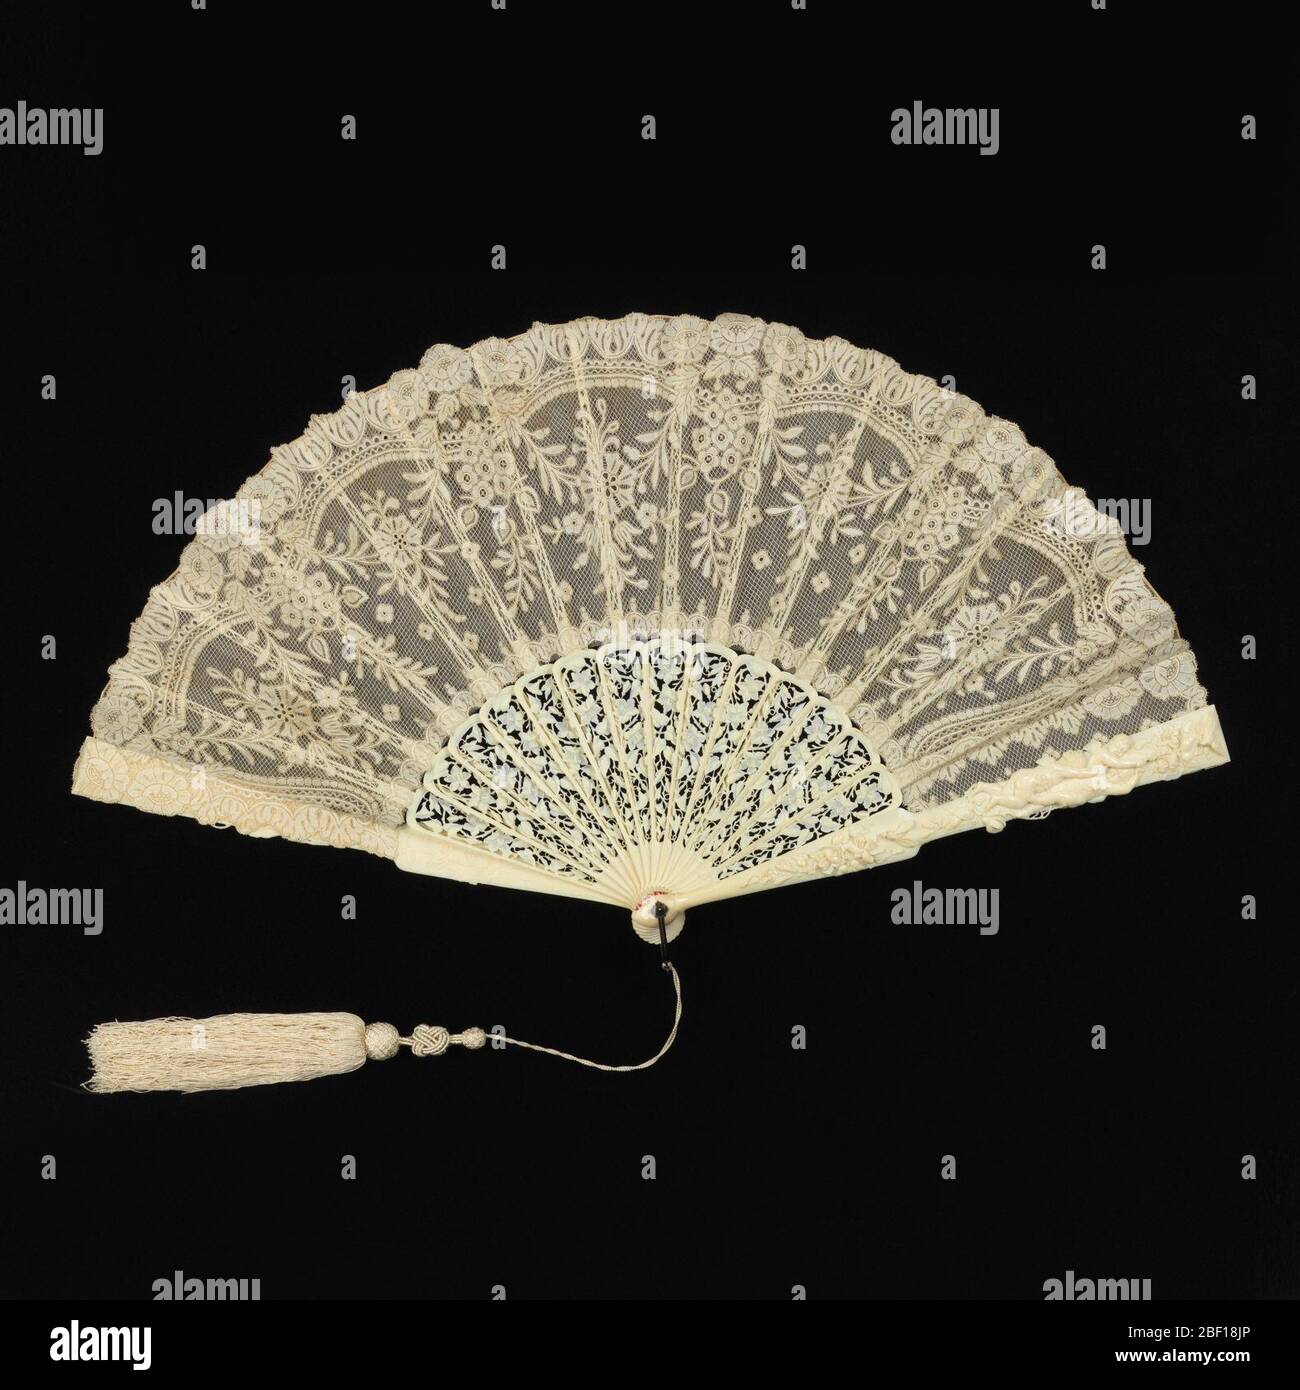 Pleated fan. Pleated fan. Leaf ofwhite cotton bobbin-made Valenciennes lace in floral design, backed with silk net. Sticks of pierced and carved ivory in floral design. Guards with figures of birds, cupids and insects. Metal loop at the rivet. Attached tassel. Stock Photo